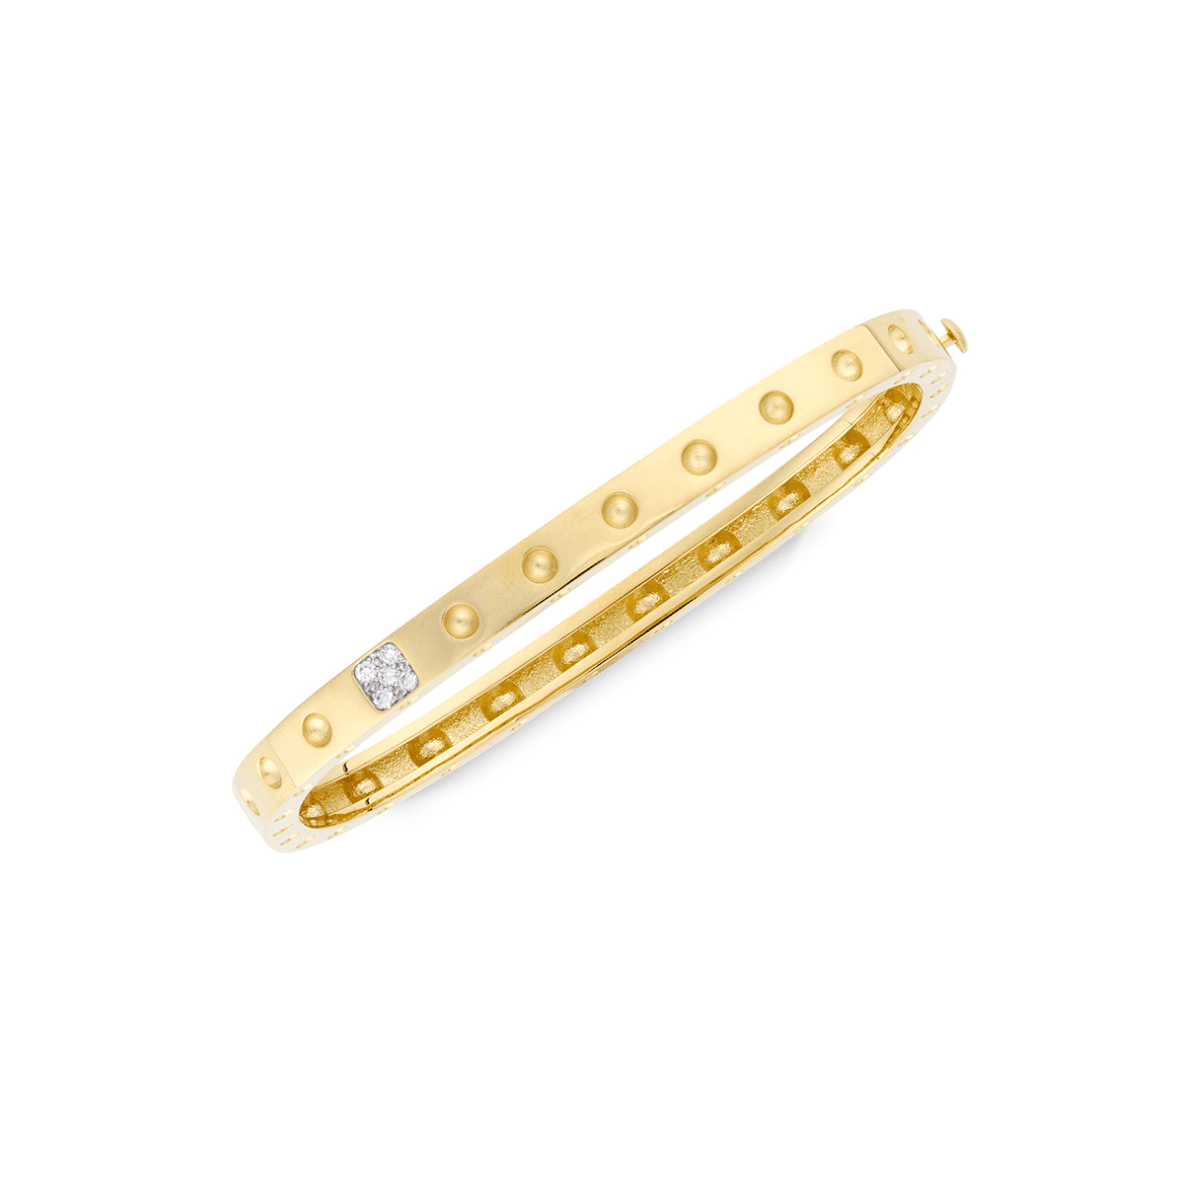 Roberto Coin 18K Pois Moi Square Bangle with Polished Finish
